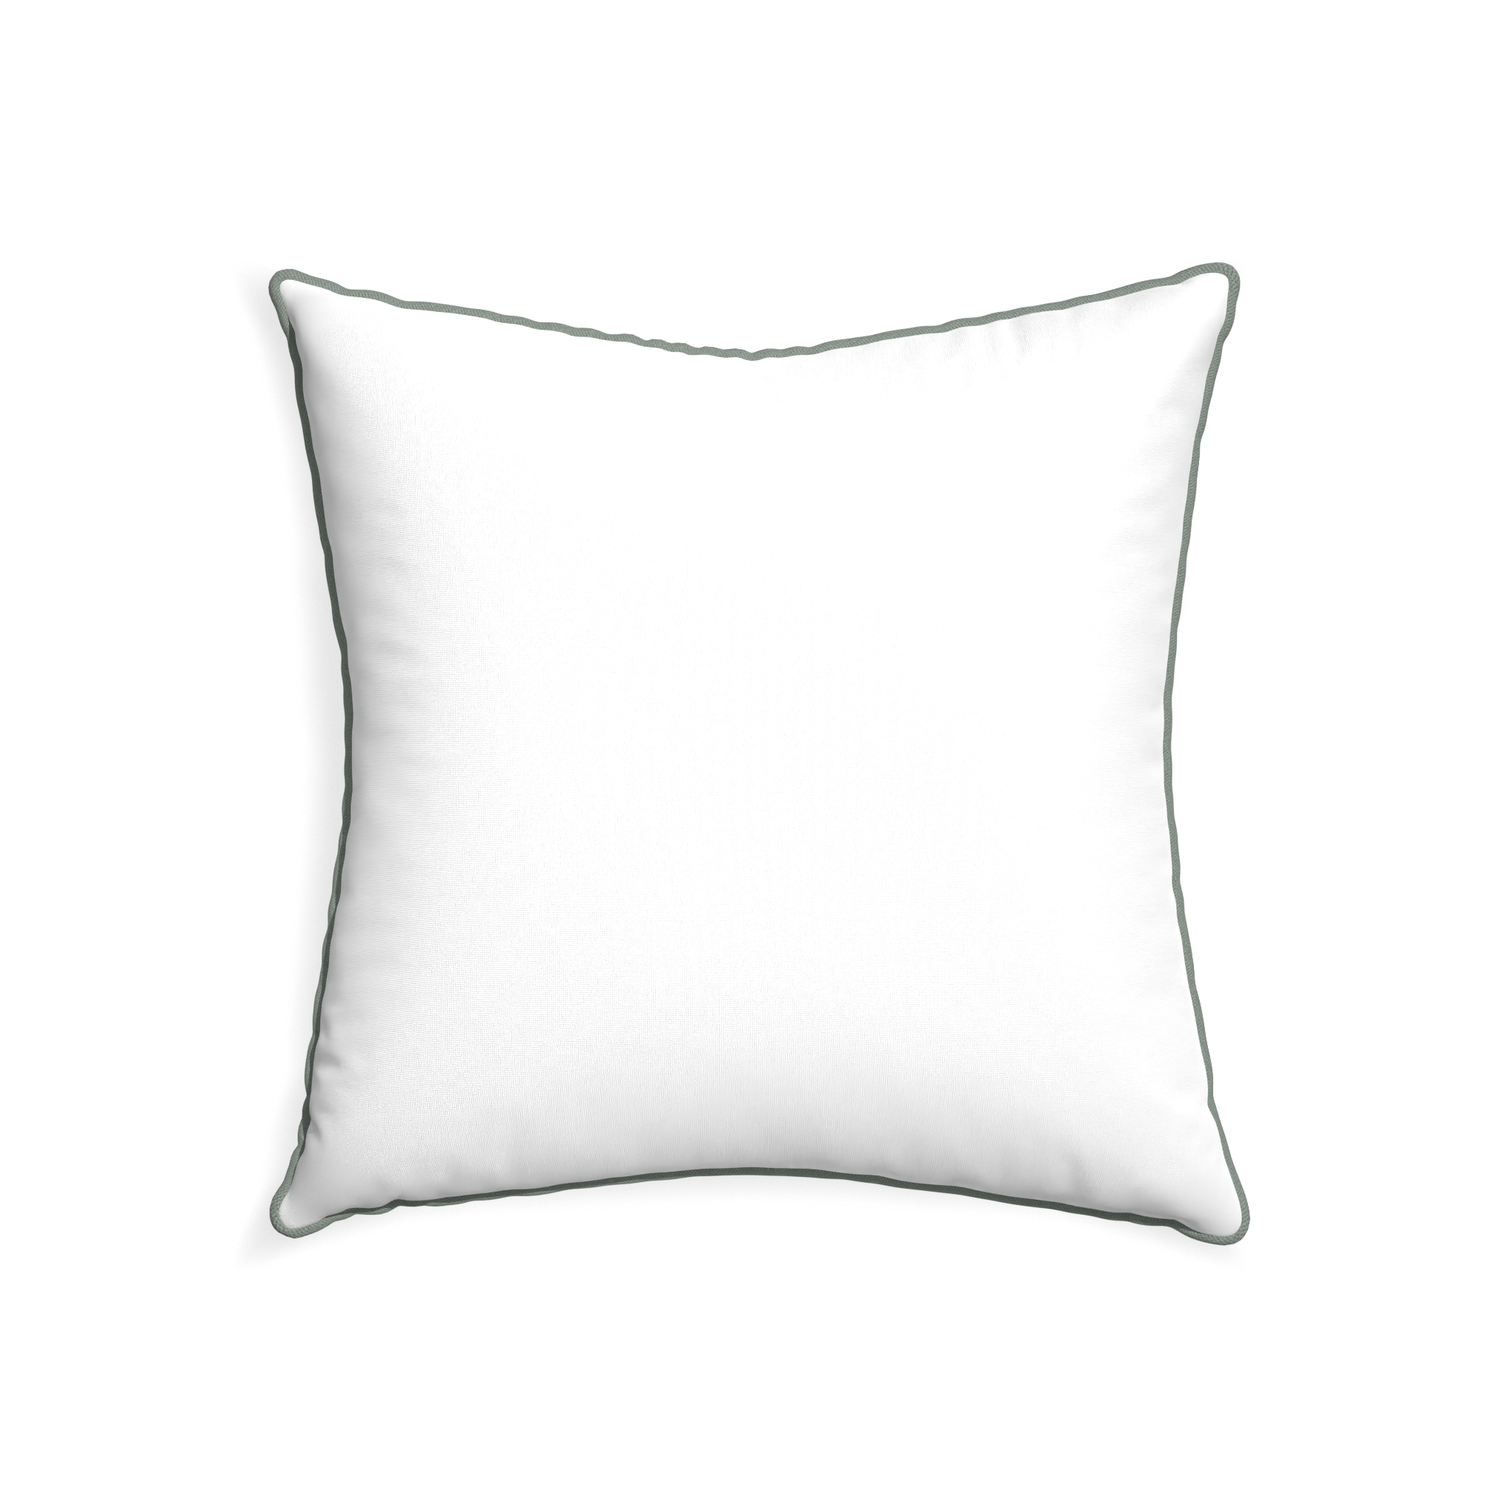 22-square snow custom white cottonpillow with sage piping on white background